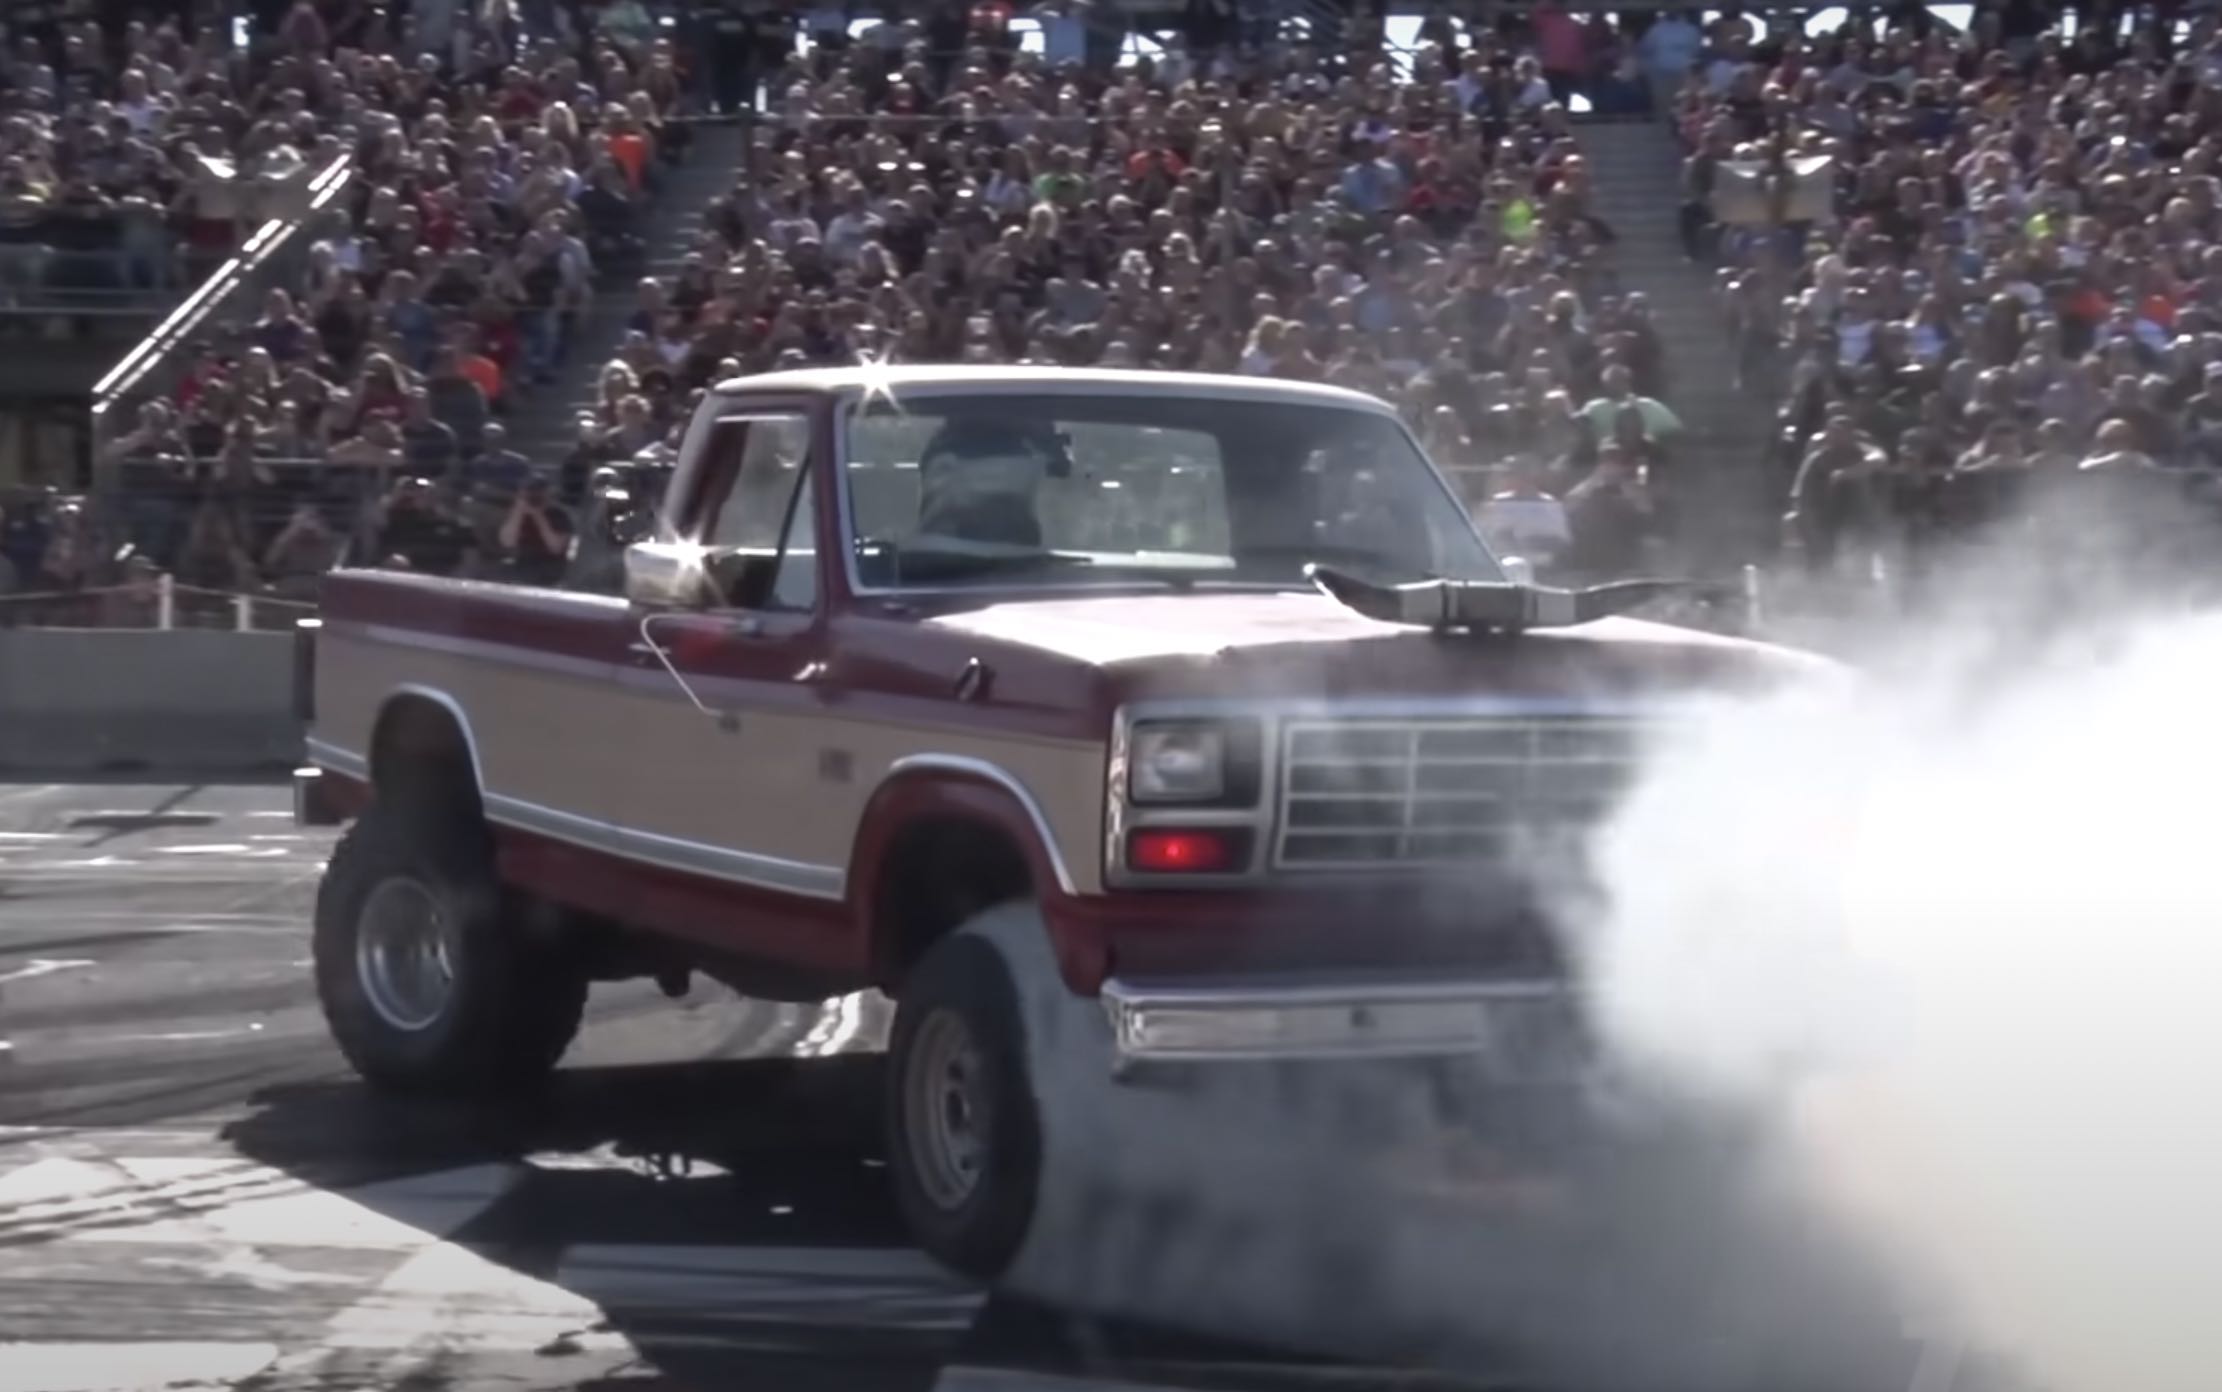 Smoke in front of a 1985 Ford F-150 truck modified to drive backward as it does burnouts, a crowd visible in the background.